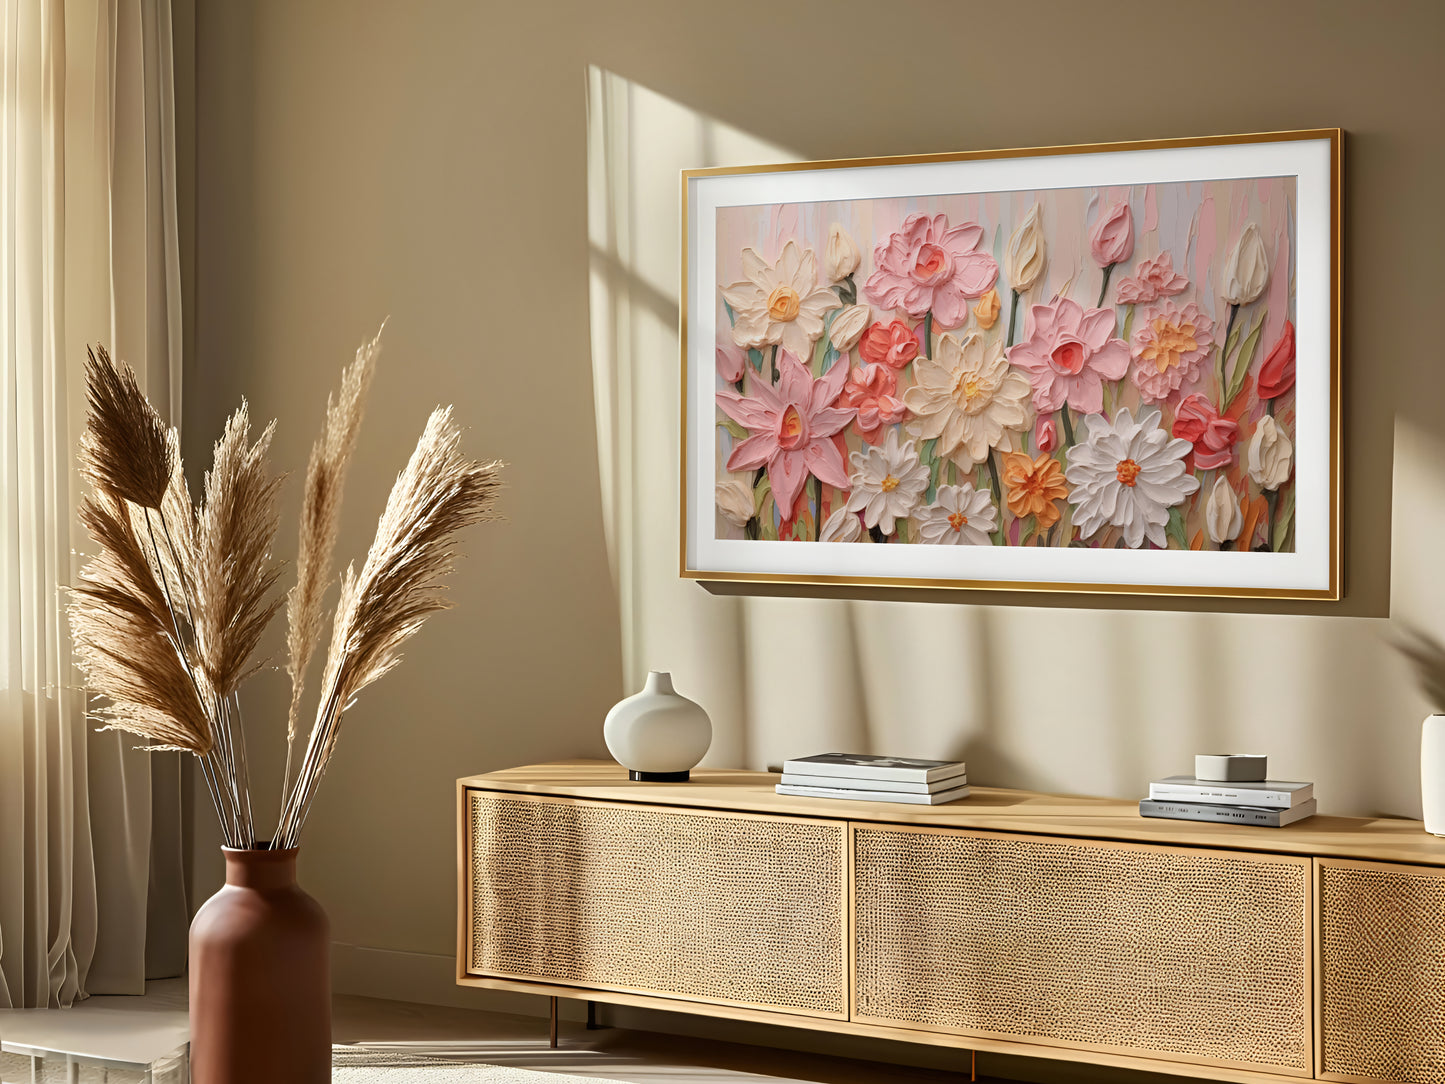 Abstract Wildflowers Frame TV Art